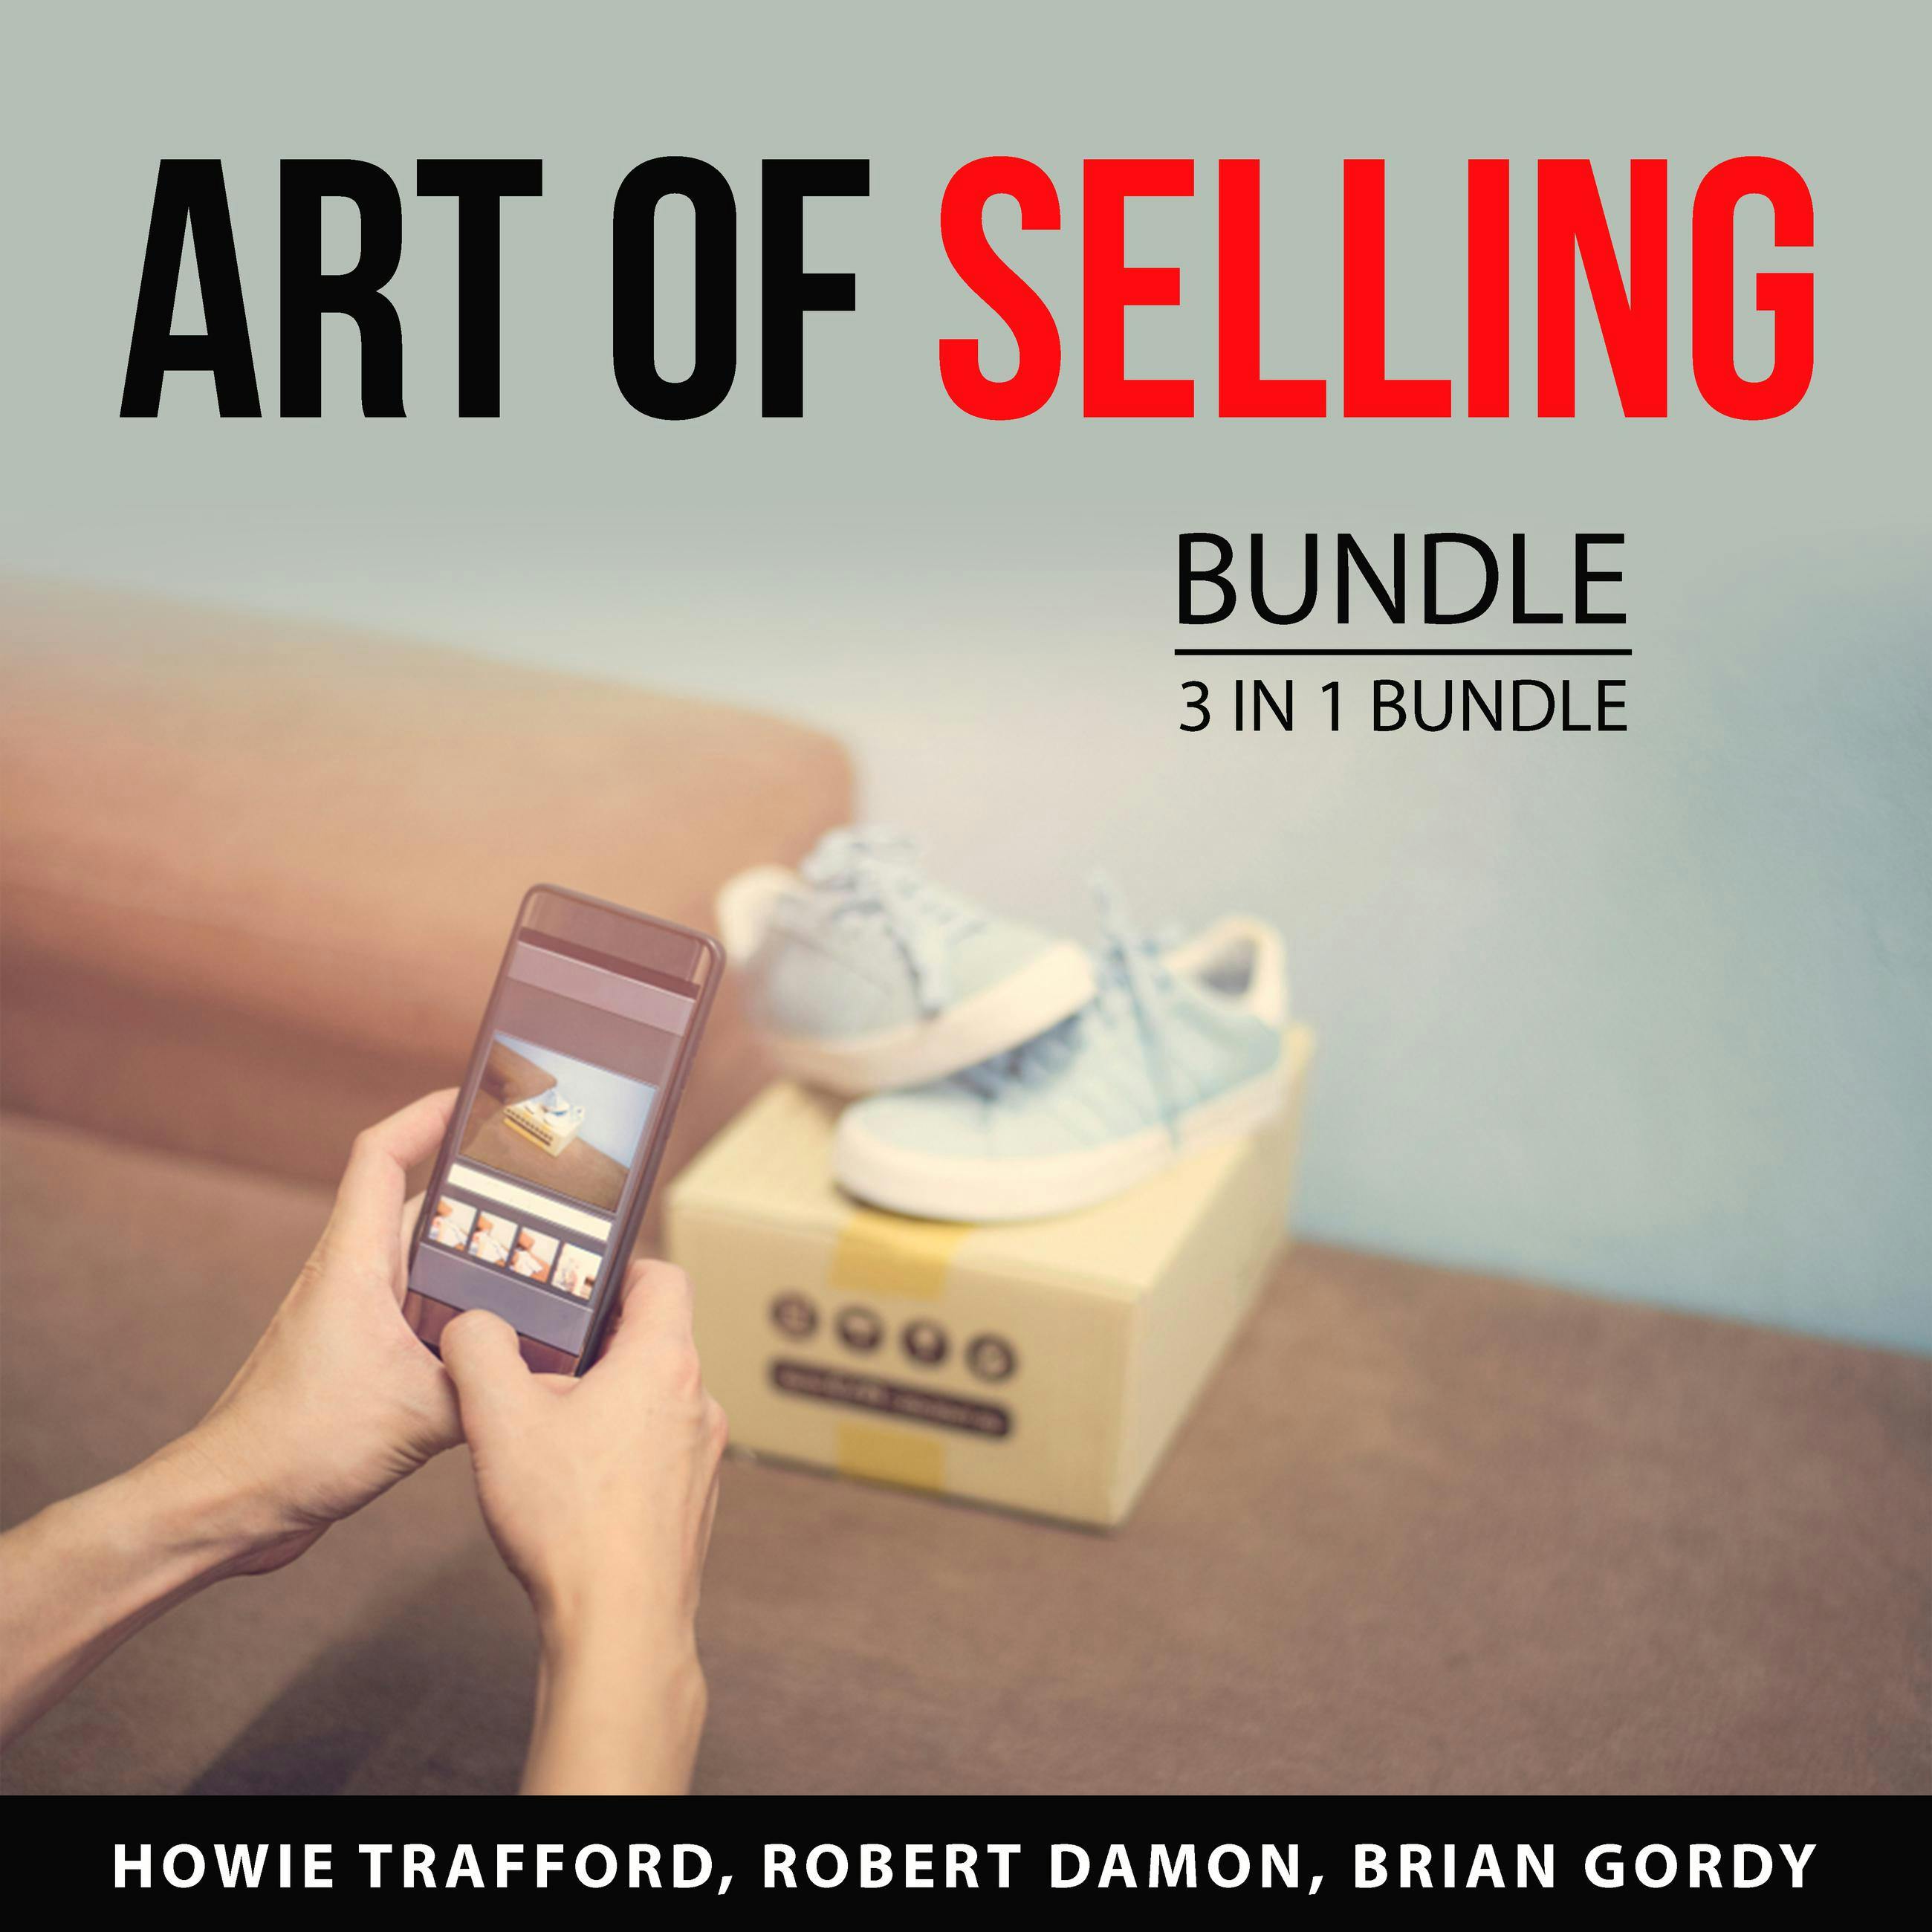 Art of Selling Bundle, 3 in 1 Bundle: How to Create a Bestseller, Close Every Sale, and Pricing Strategies - undefined